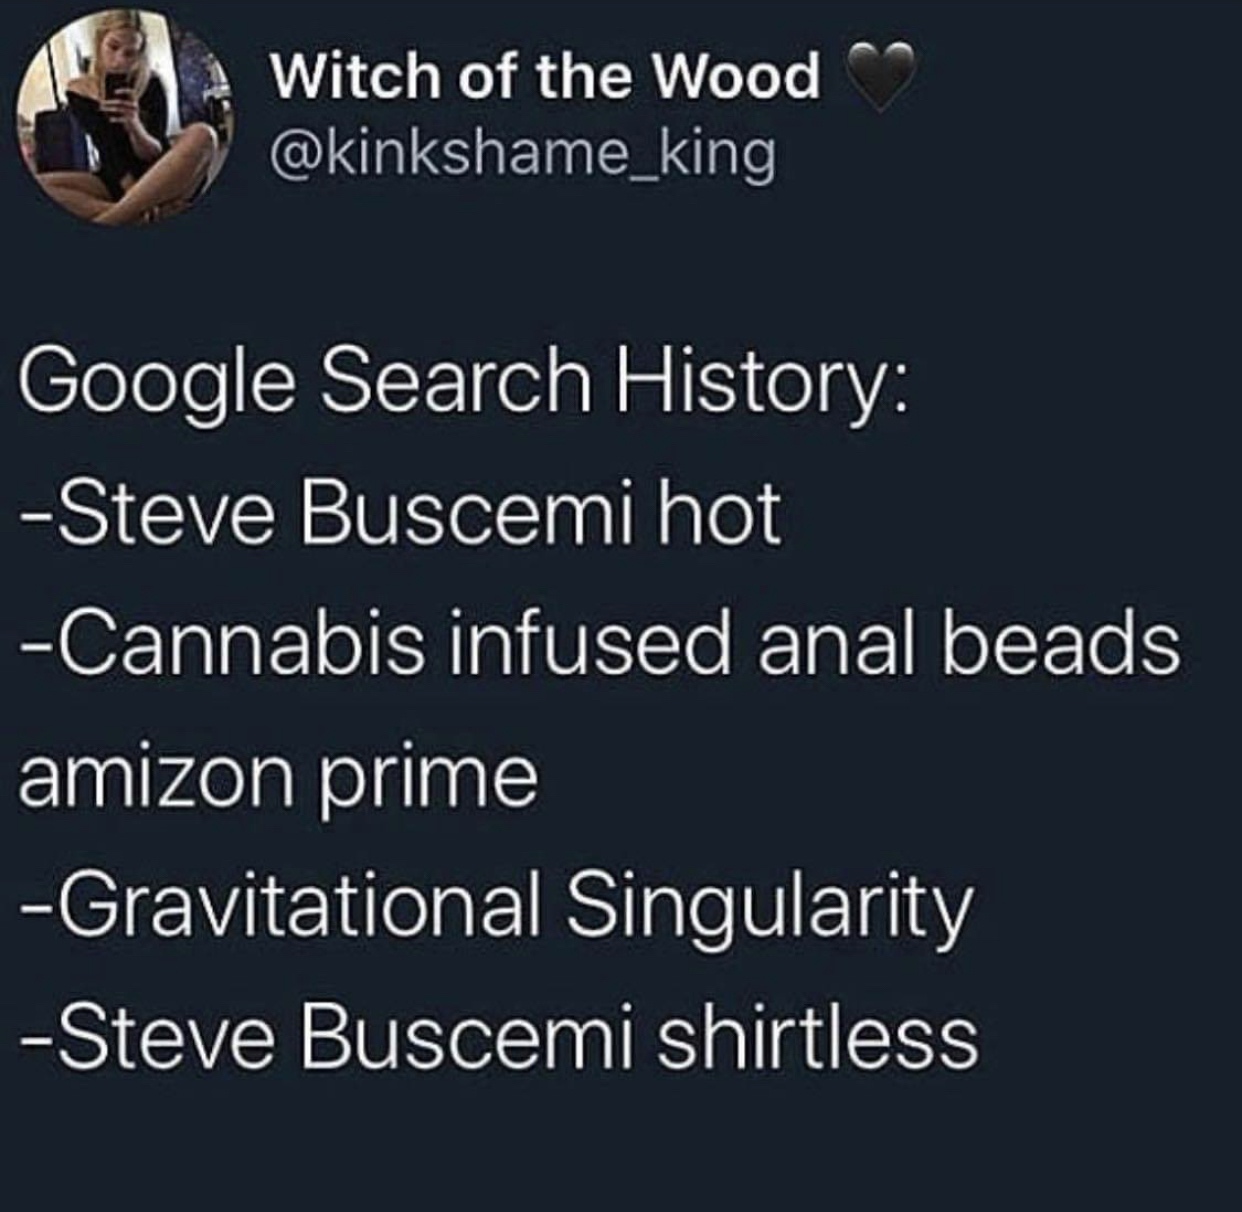 presentation - Witch of the Wood Google Search History Steve Buscemi hot Cannabis infused anal beads amizon prime Gravitational Singularity Steve Buscemi shirtless